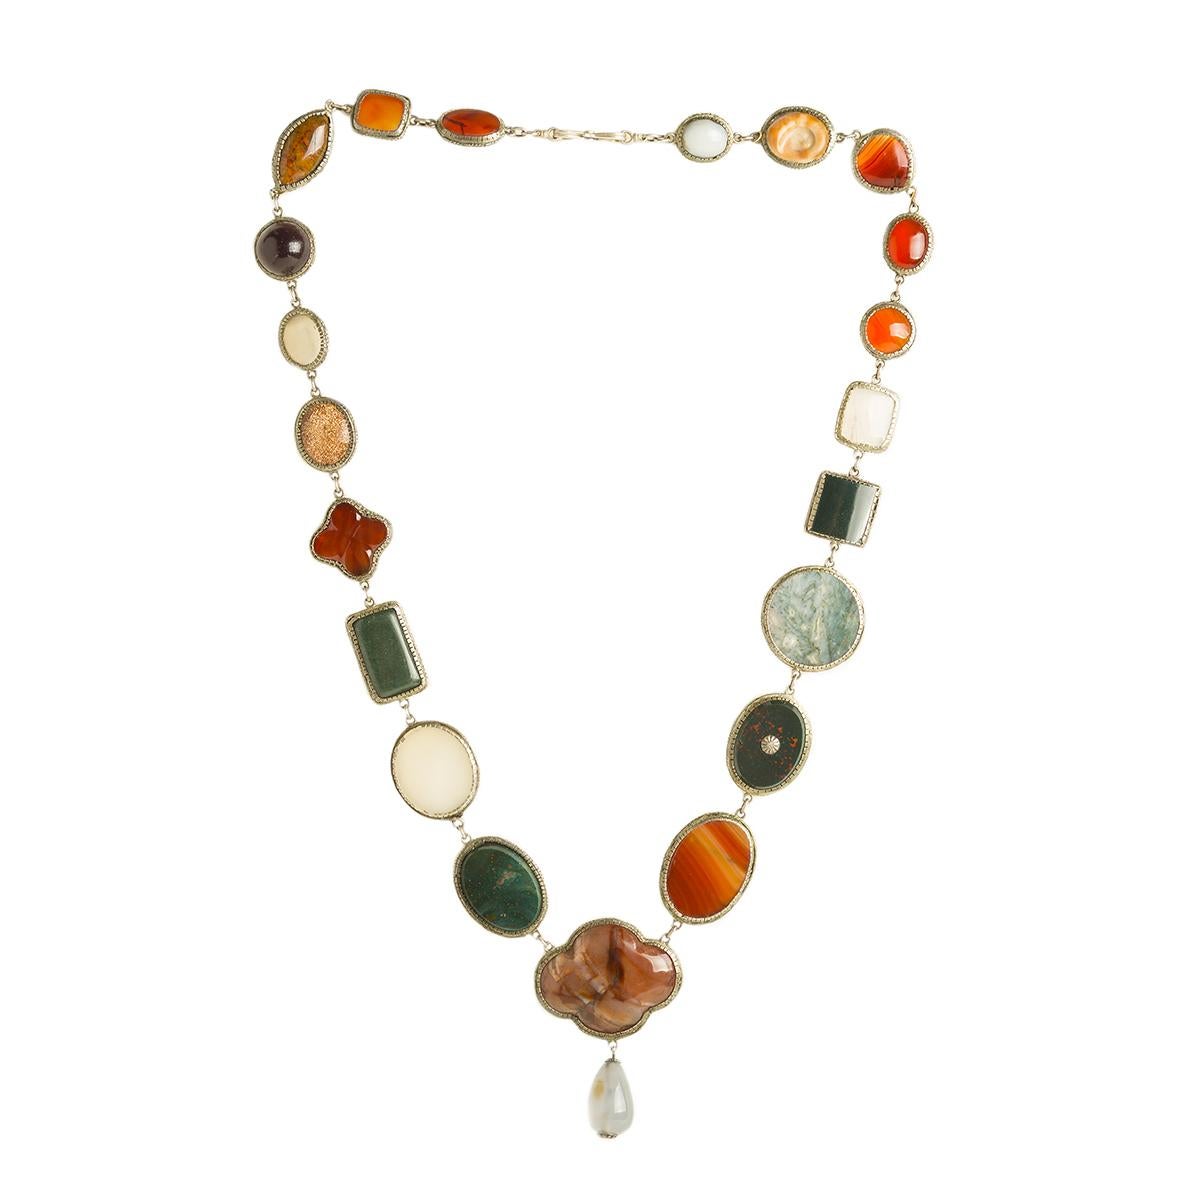 Late Victorian 1820s 925 Silver Necklace with Agate and Semiprecious Stones For Sale